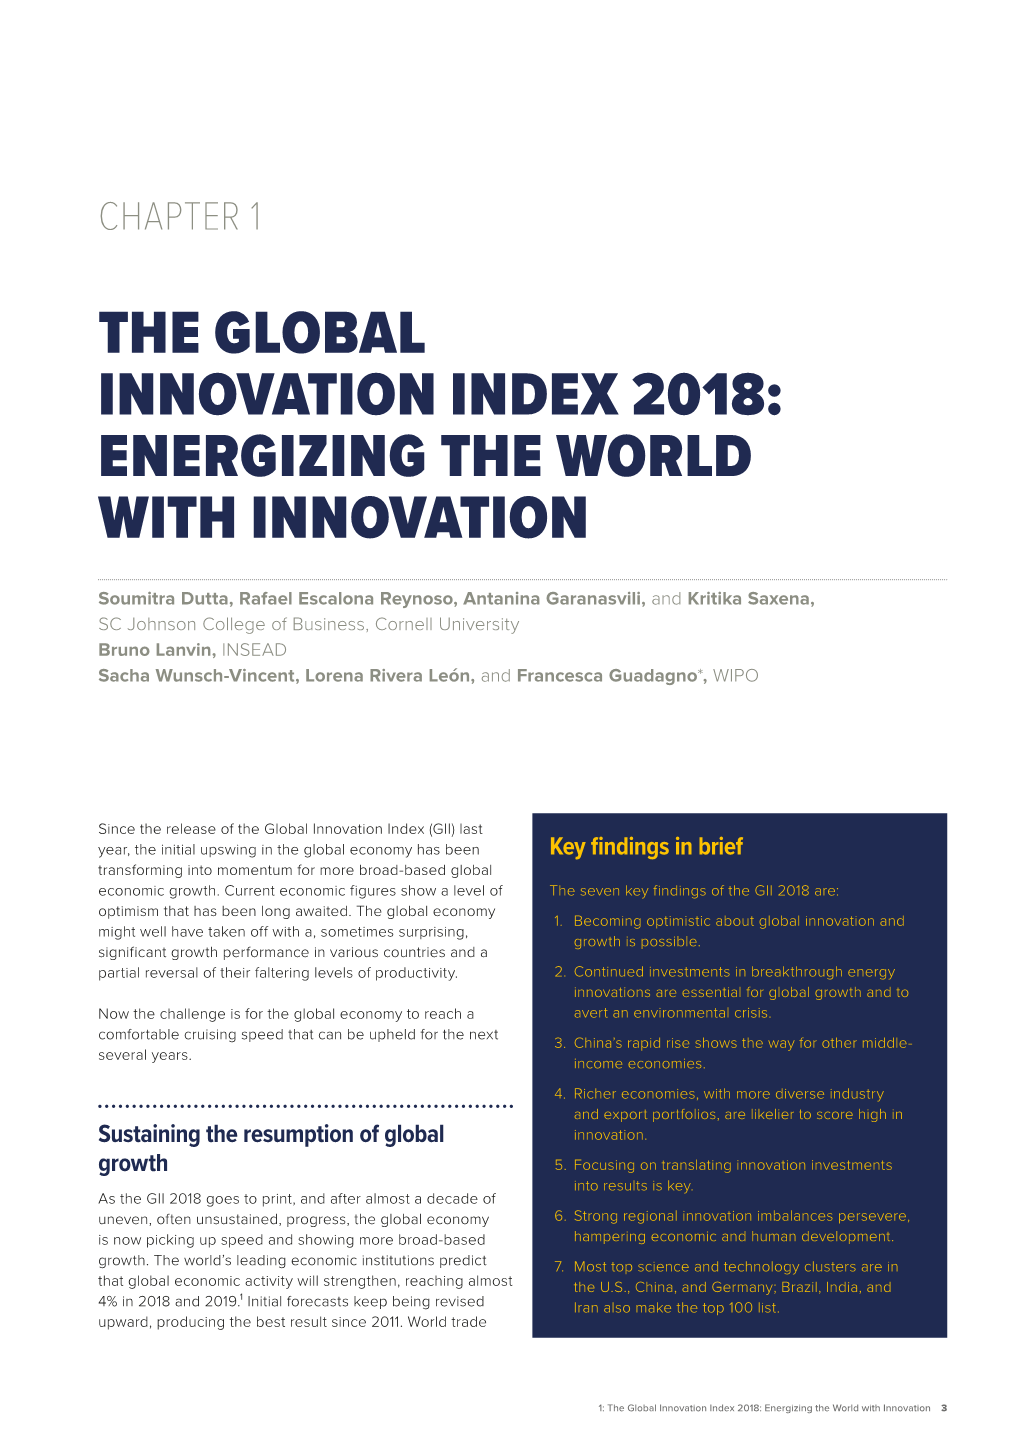 Global Innovation Index 2018: Energizing the World with Innovation